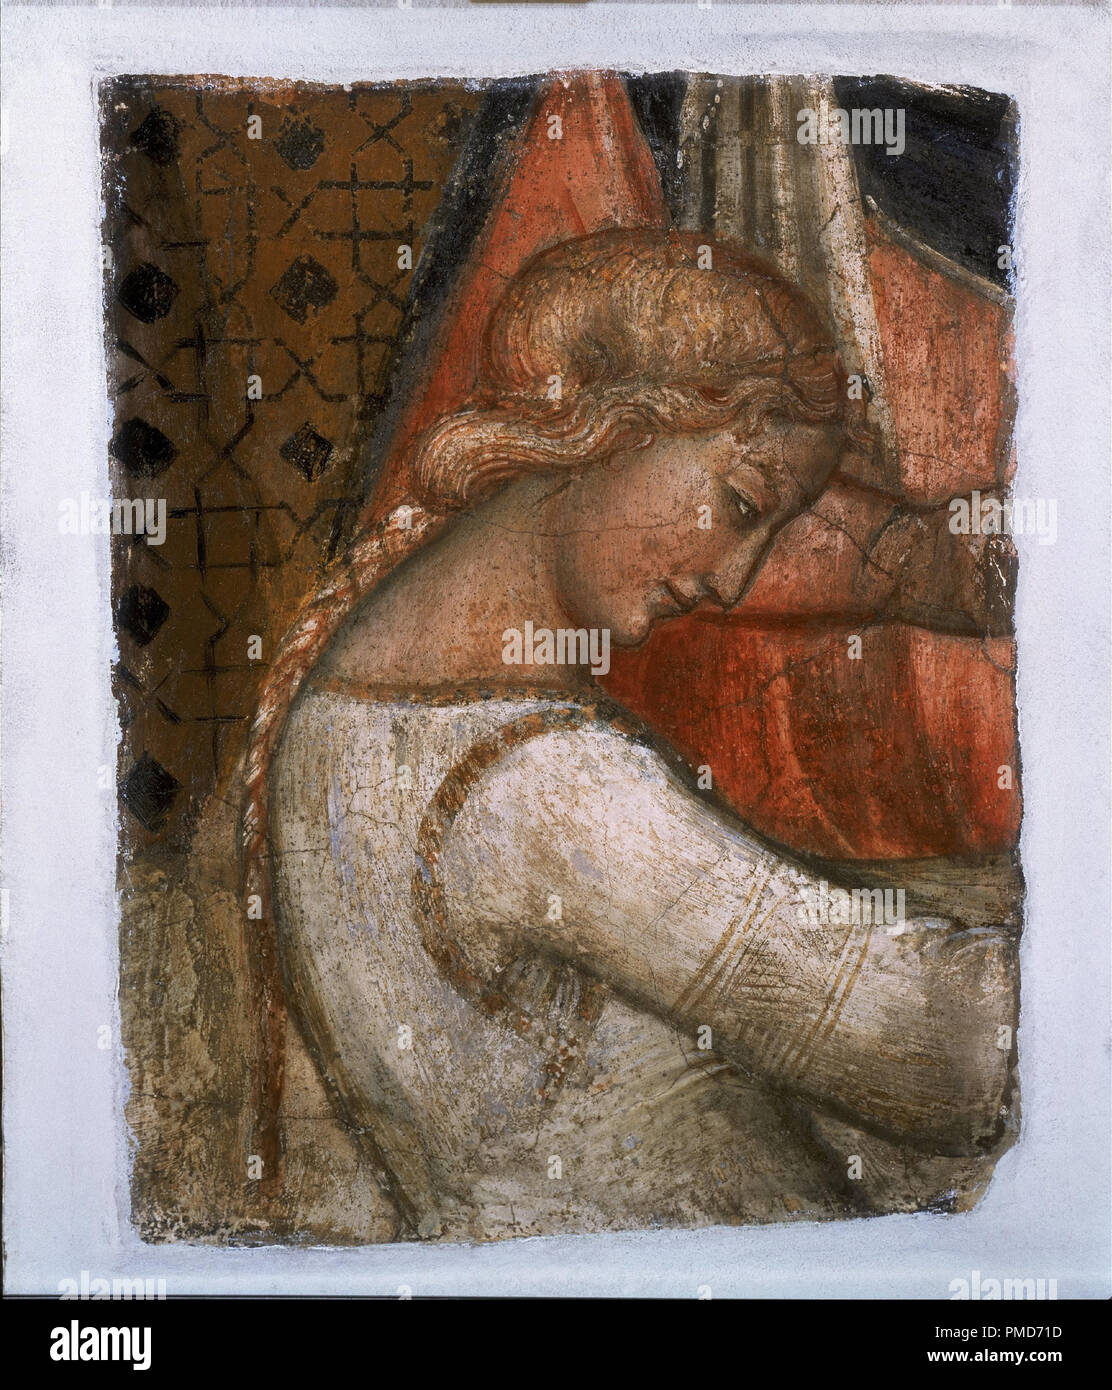 Salome. Date/Period: Ca. 1390. Painting. Fresco. Height: 395 mm (15.55 in); Width: 310 mm (12.20 in). Author: Spinello Aretino [Spinello di Luca Spinelli]. Stock Photo